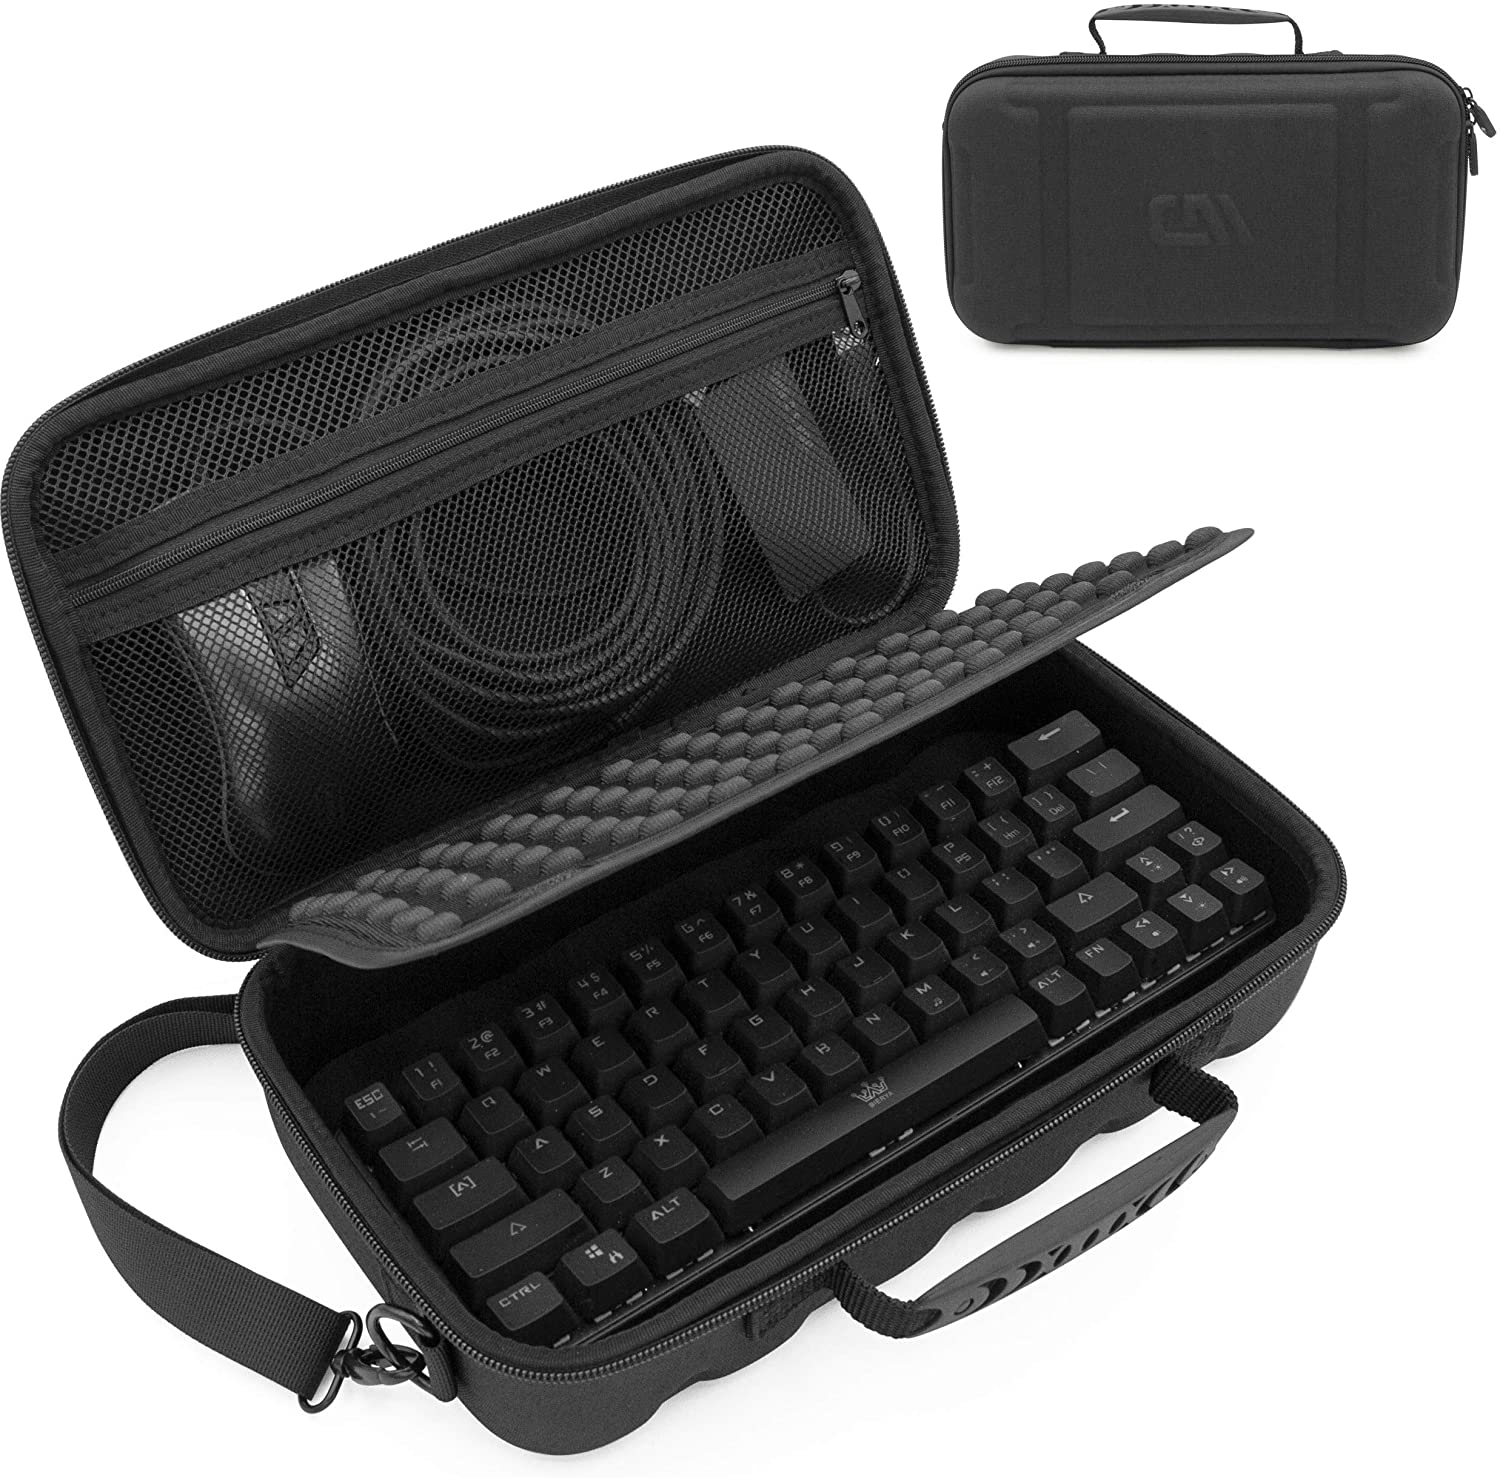 Razer Keyboard Bag V2 レイザー キーボード バッグ ブイツー – GRAPHT OFFICIAL STORE